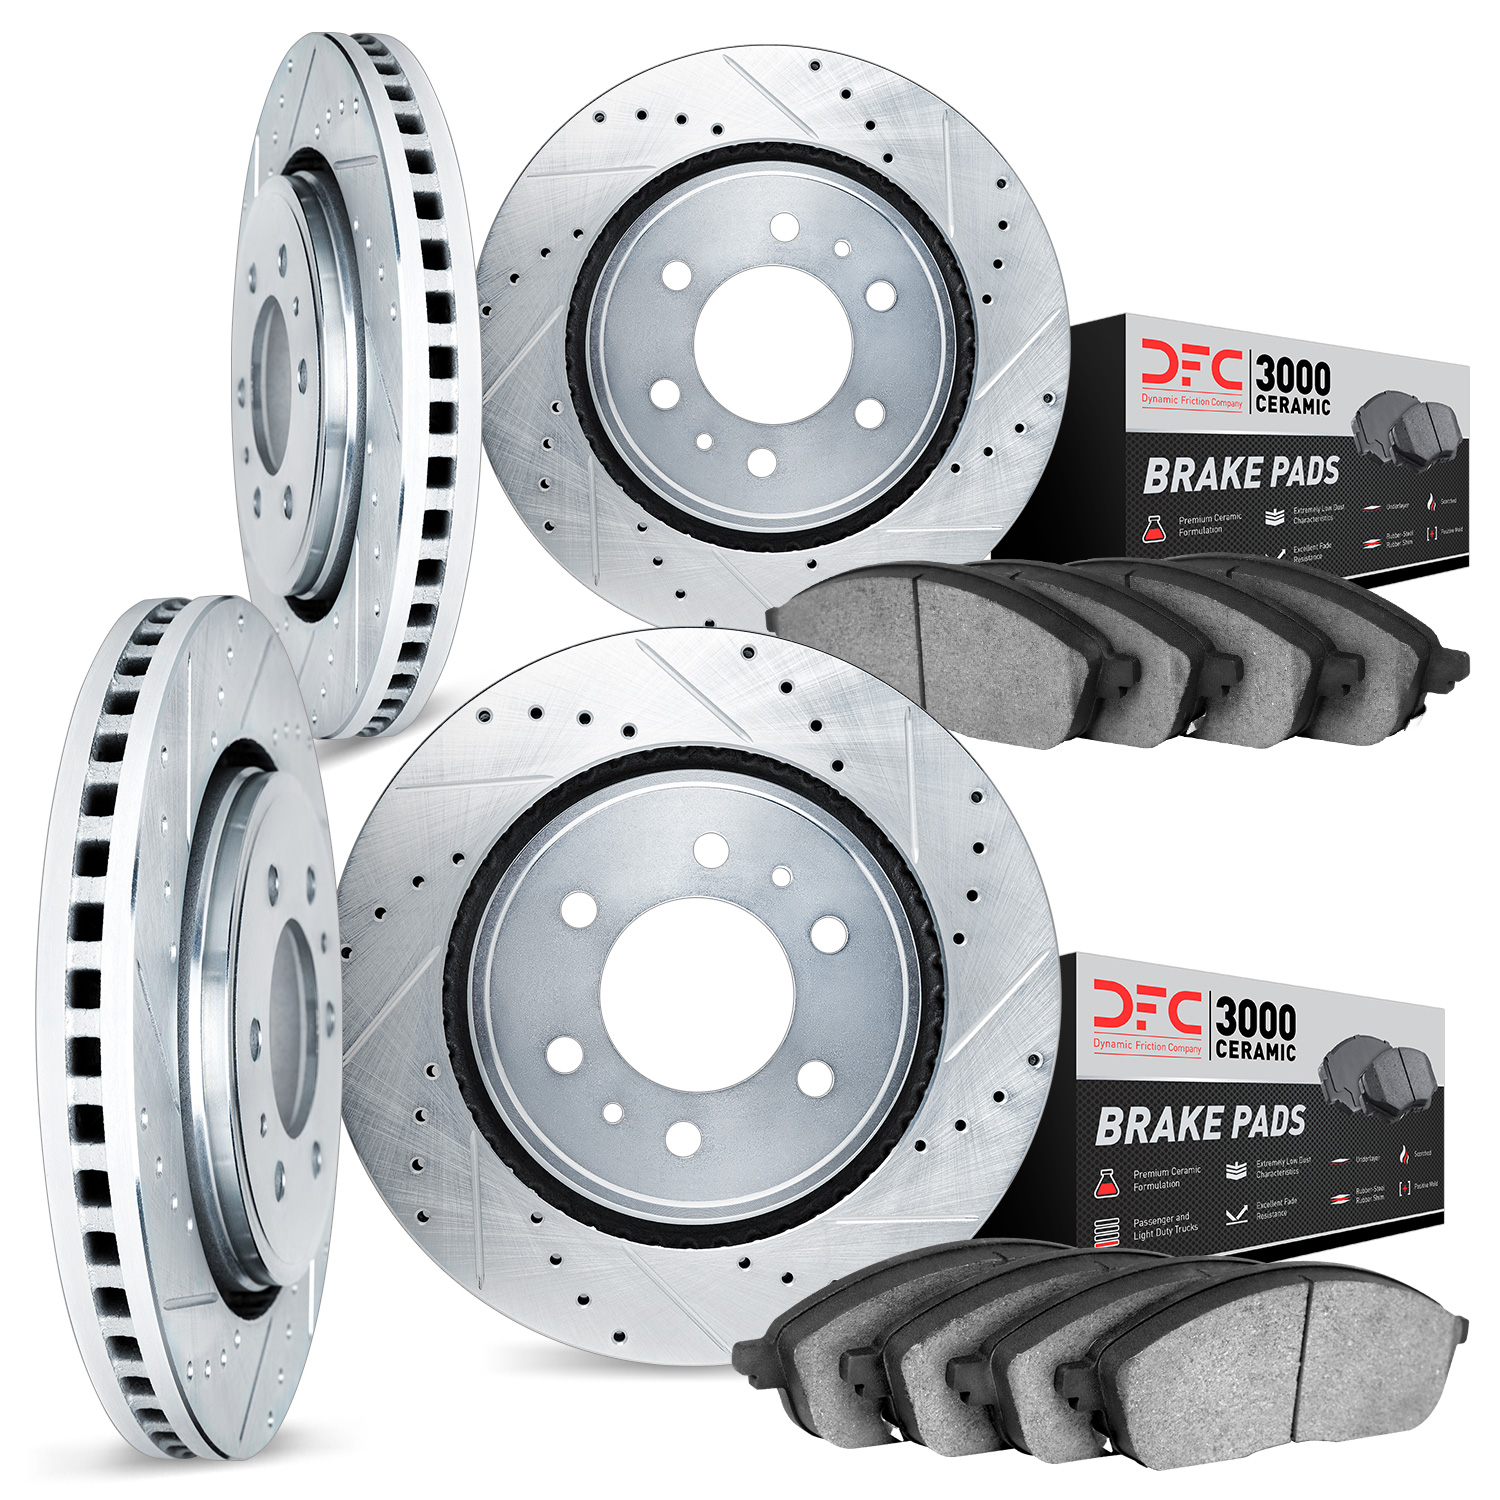 7304-76069 Drilled/Slotted Brake Rotor with 3000-Series Ceramic Brake Pads Kit [Silver], Fits Select Lexus/Toyota/Scion, Positio